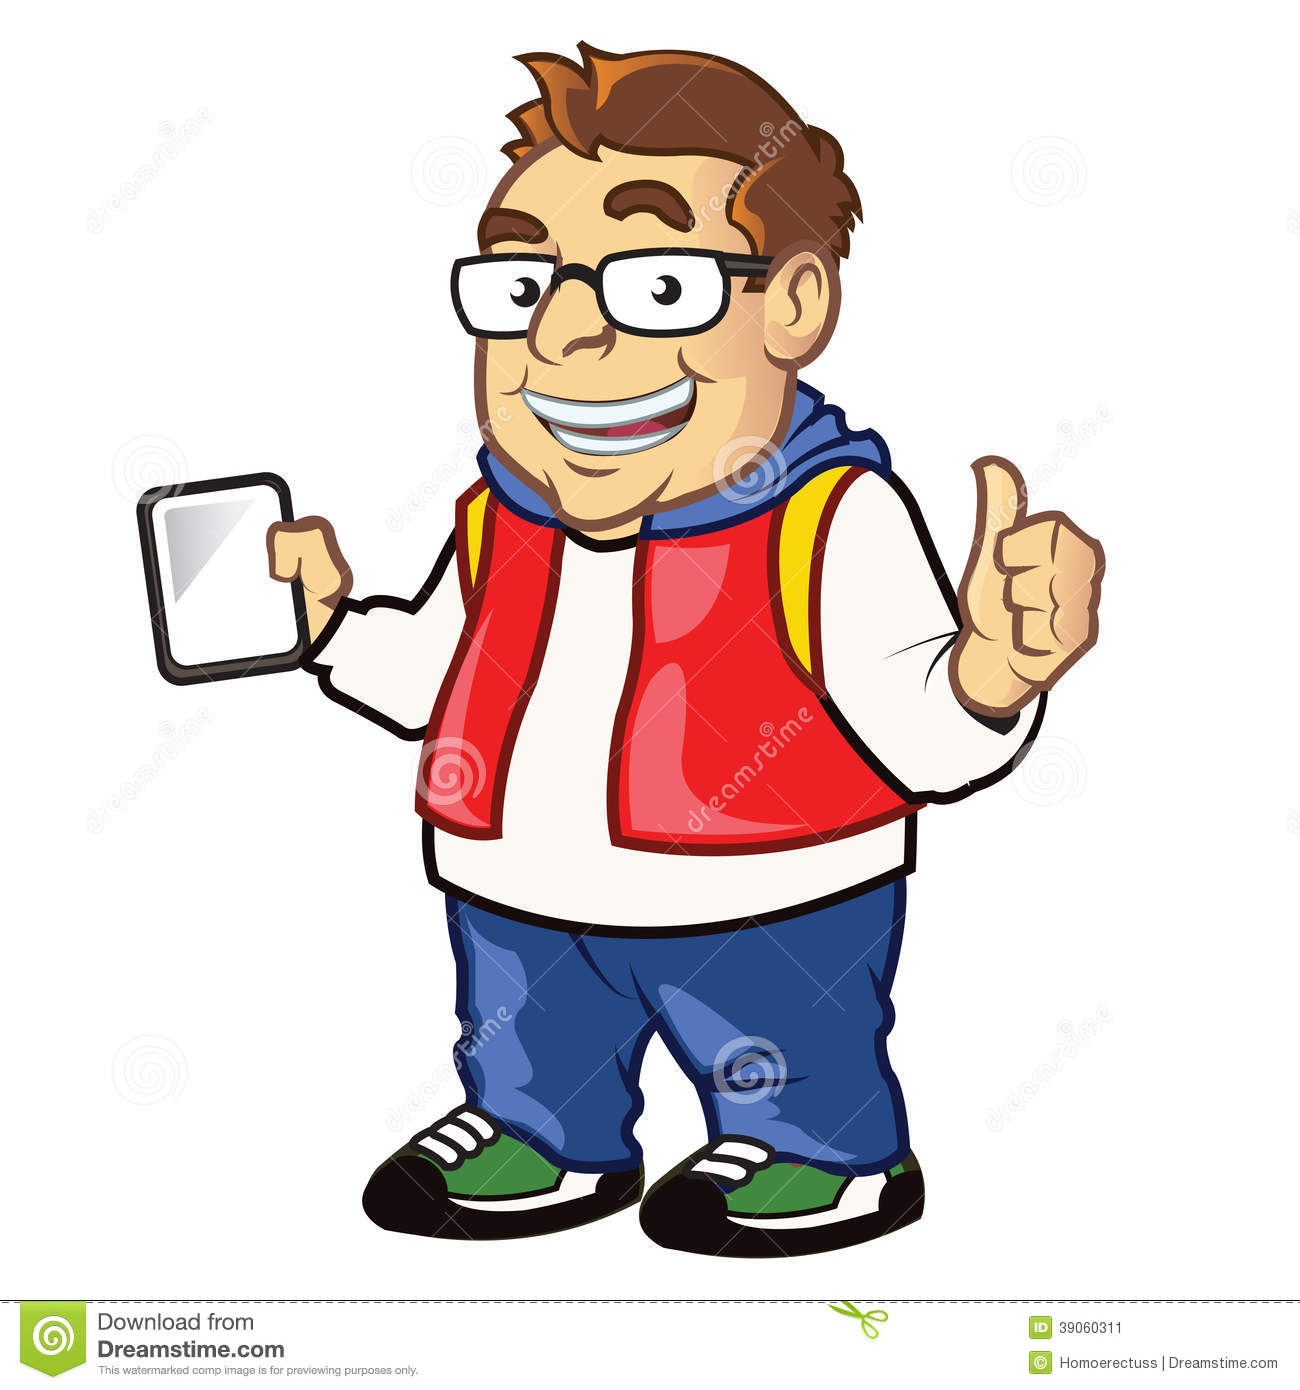 Illustration Of Funny Chubby Nerdy Boy Holding Computer Tablet Mascot